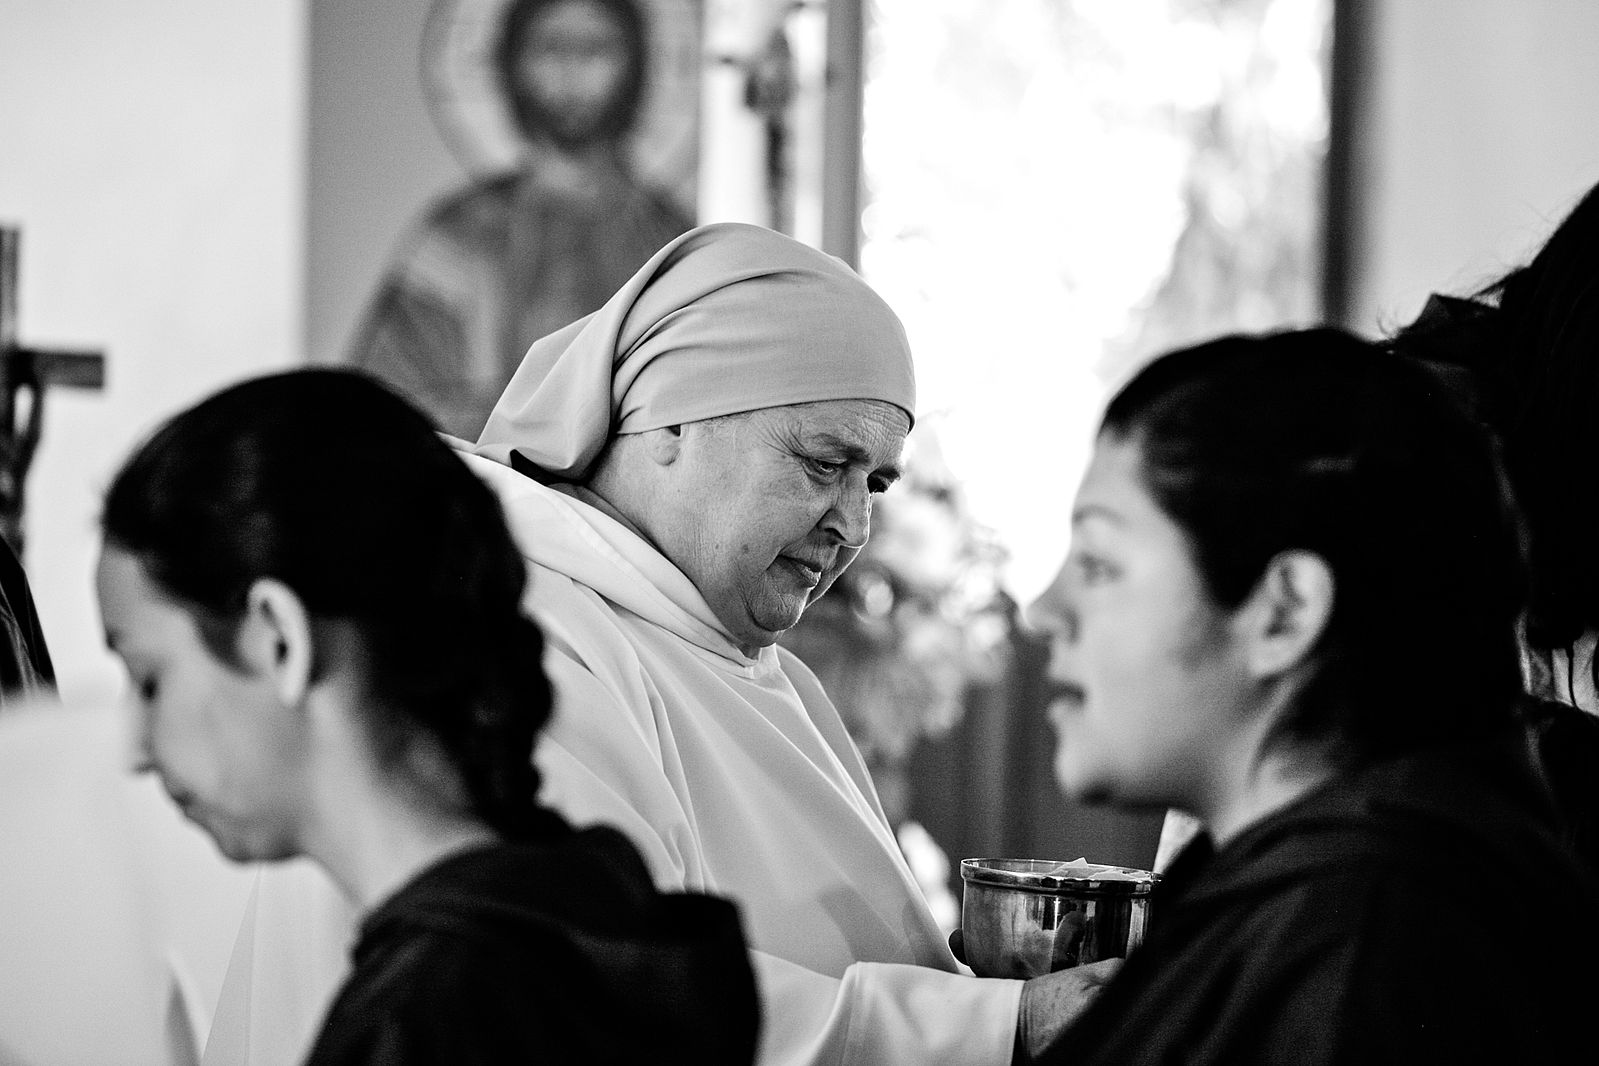 A woman with a head covering is in the middle of the photo holding a cup. There is a cross and a depiction of Jesus Christ out of focus in the background.